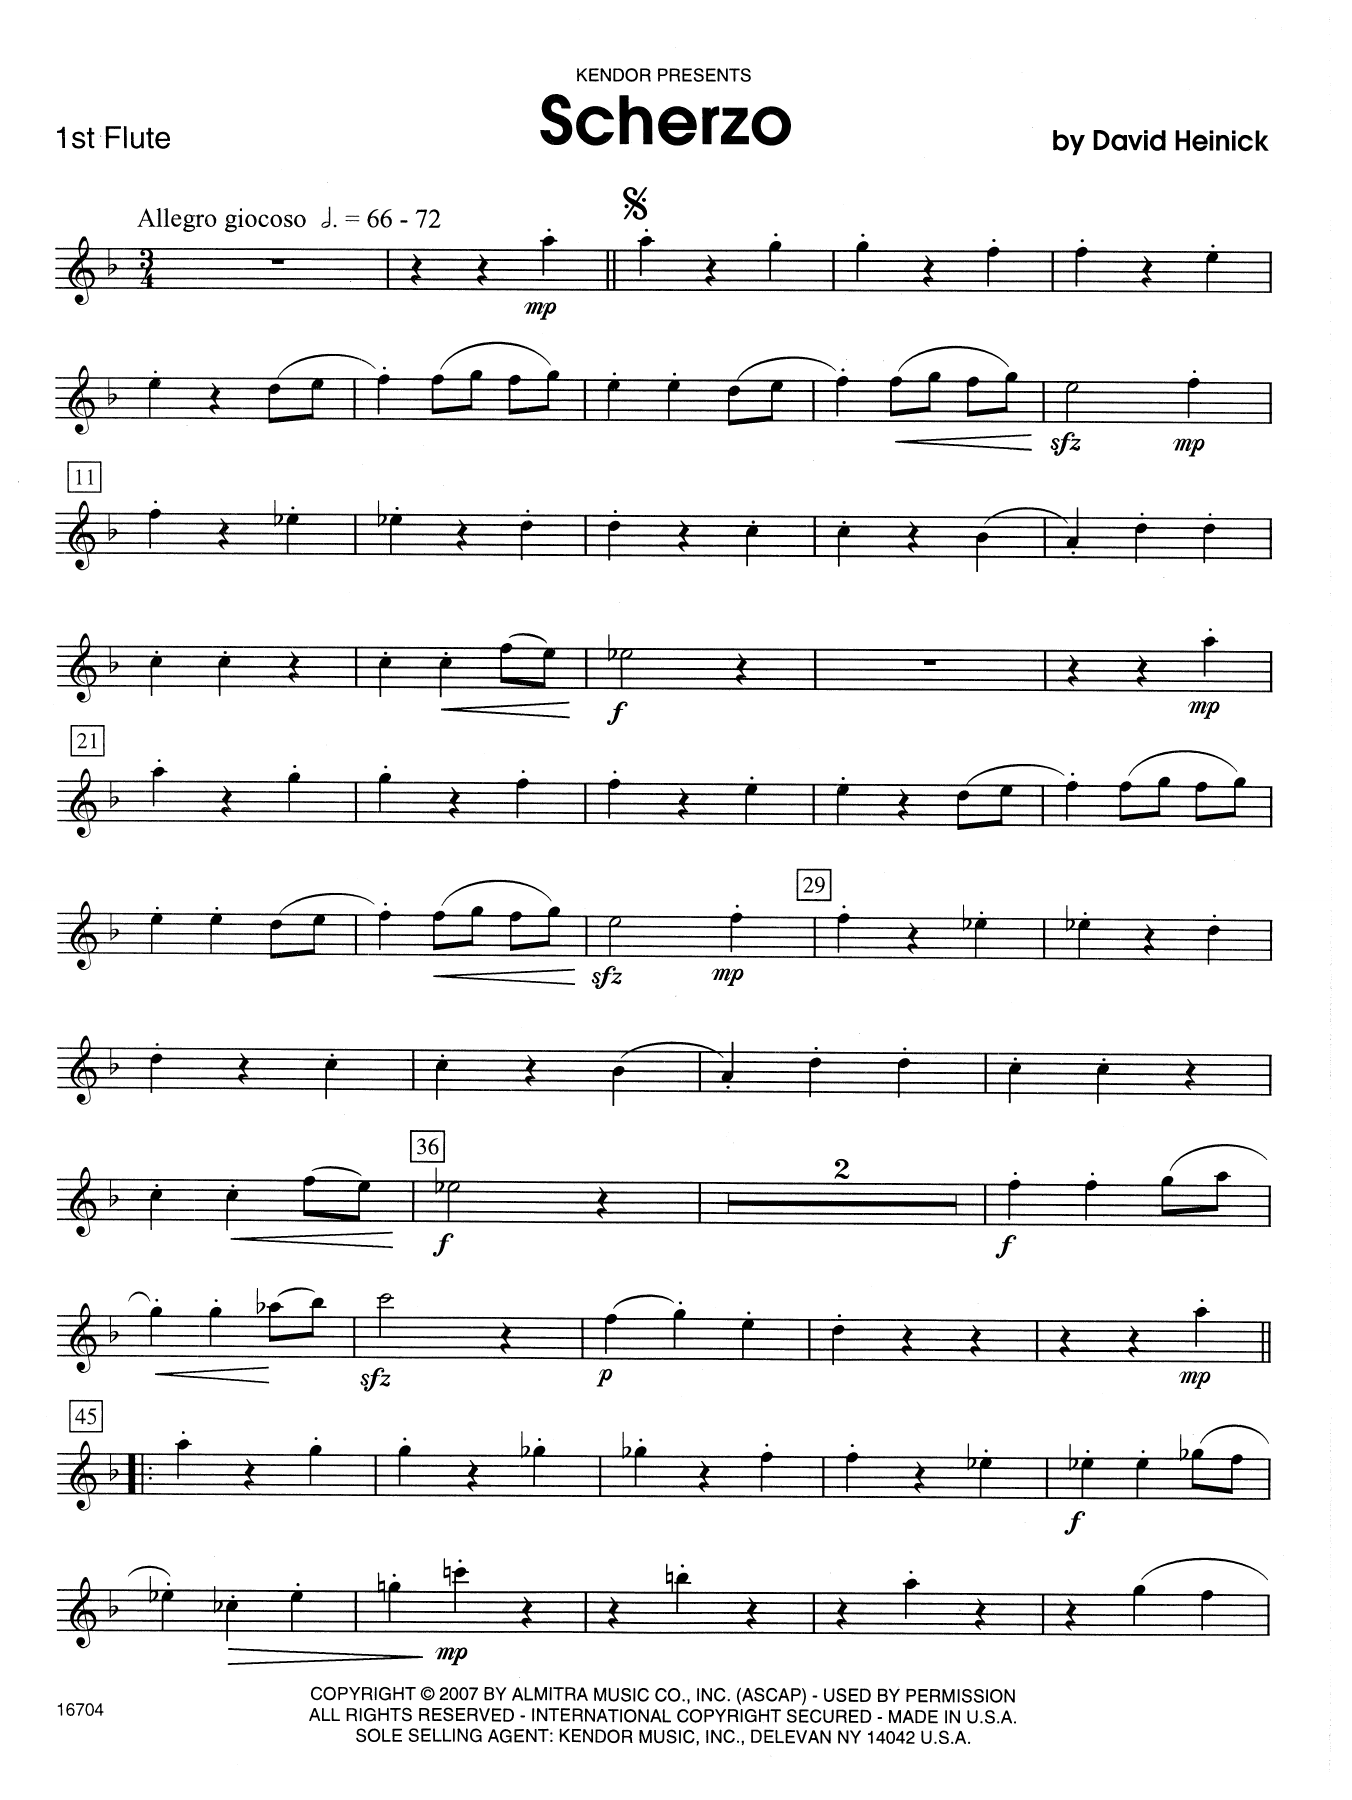 David Heinick Scherzo - 1st Flute sheet music notes and chords. Download Printable PDF.